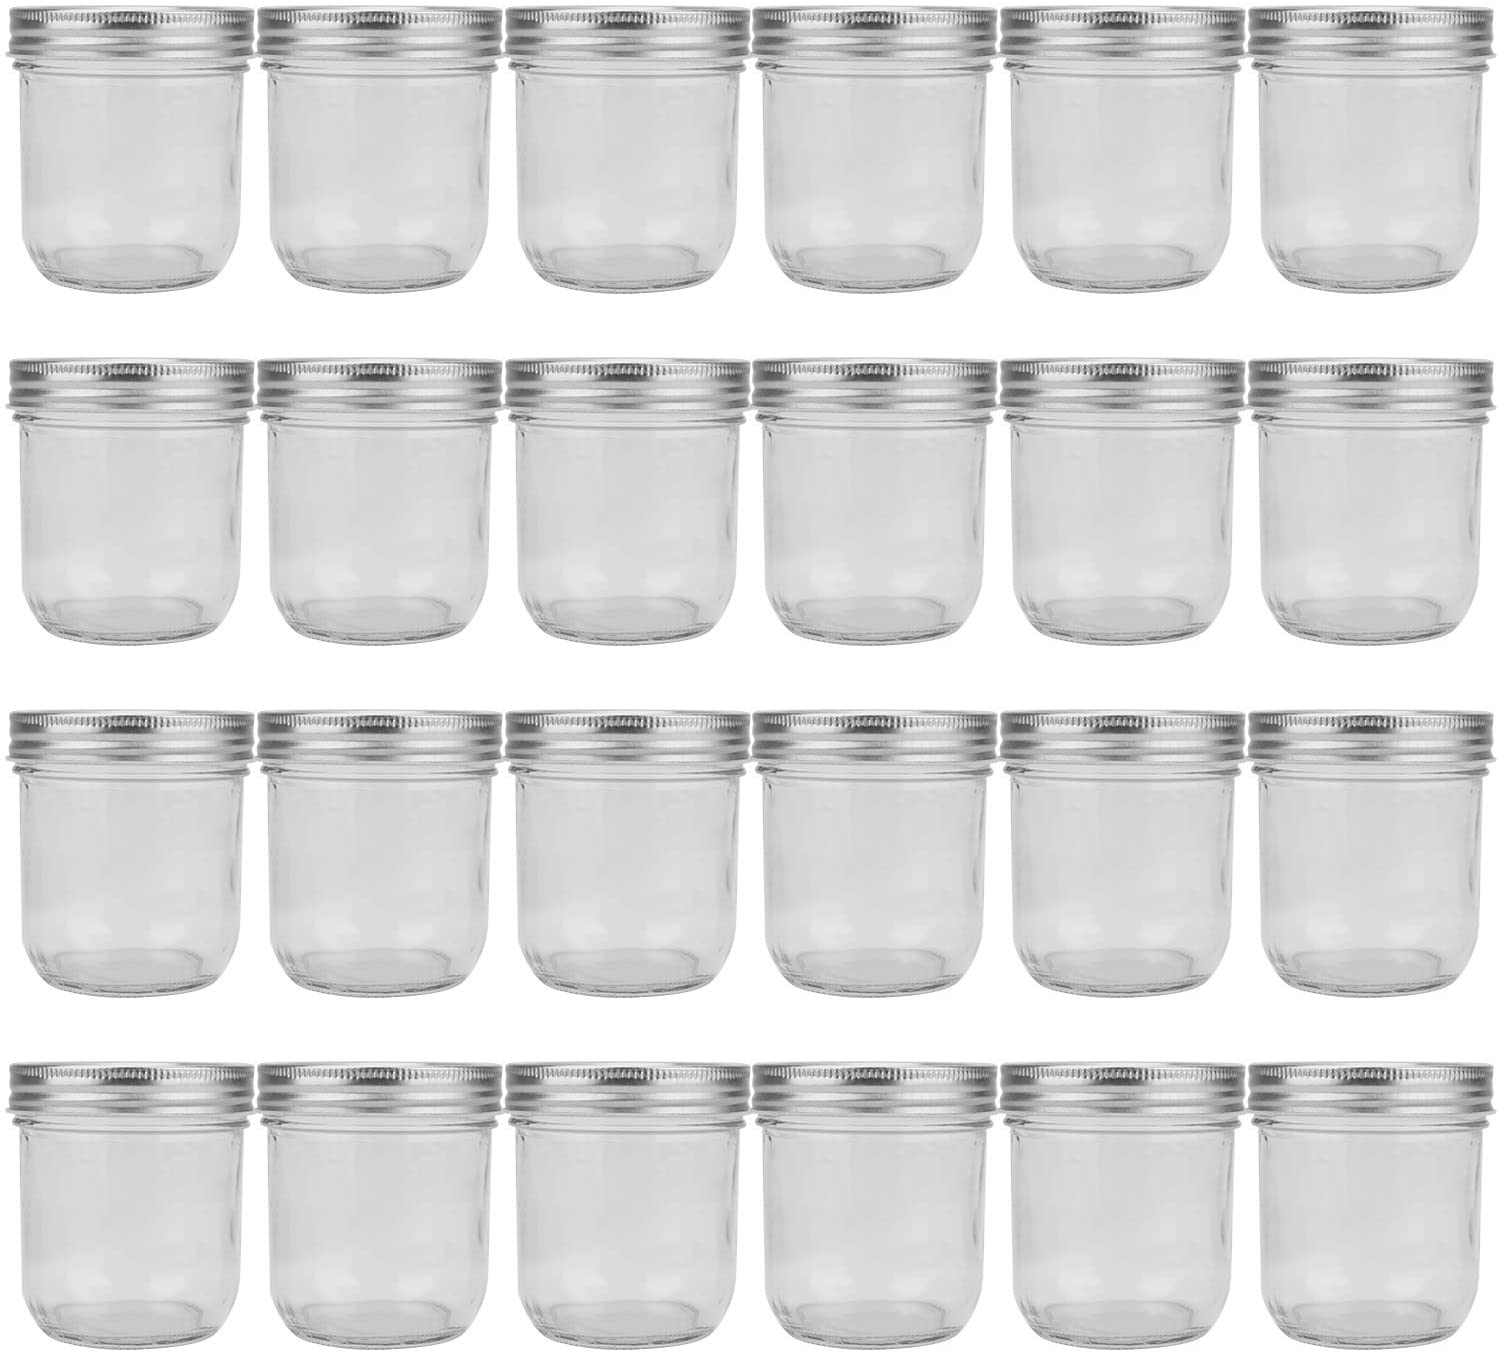 250ml Mason Jars Glass Jelly Jars, Canning Jars With Regular Lids, Ideal for Honey,Jam,Baby Foods,Wedding Favors,Shower Favors, 24 Pack - Willow